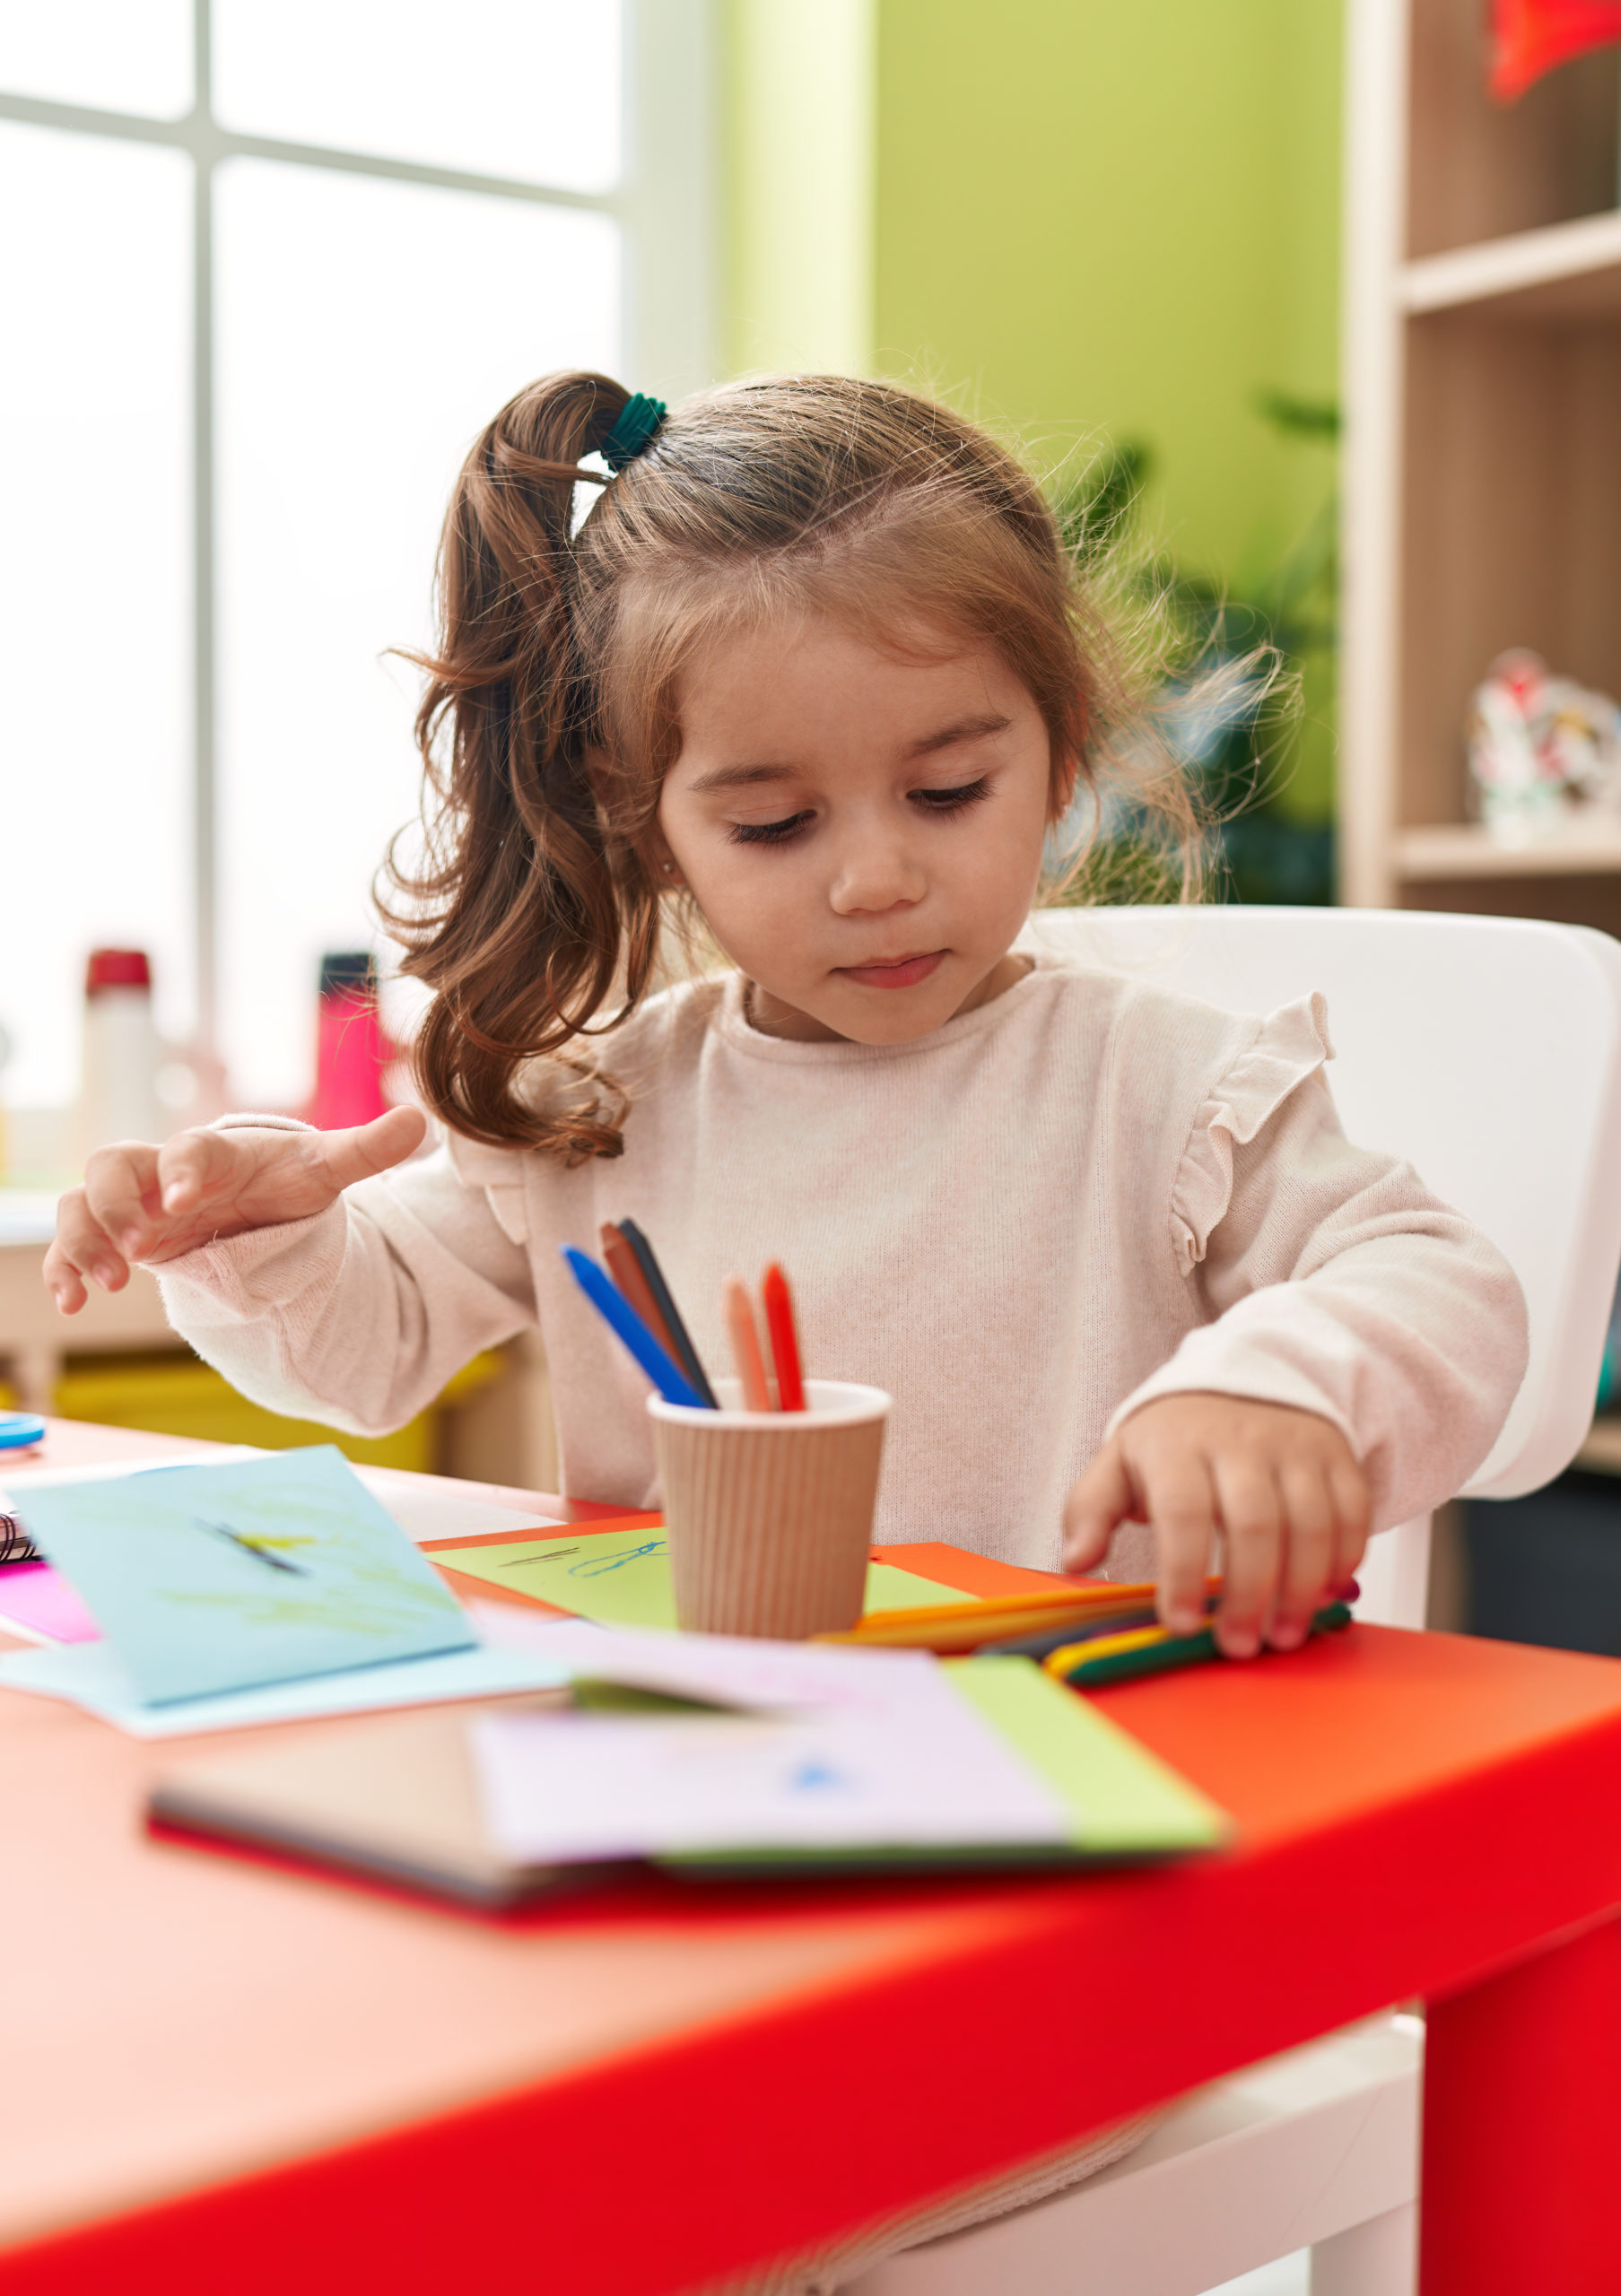 Adorable hispanic girl student sitting on table drawing on paper at kindergarten